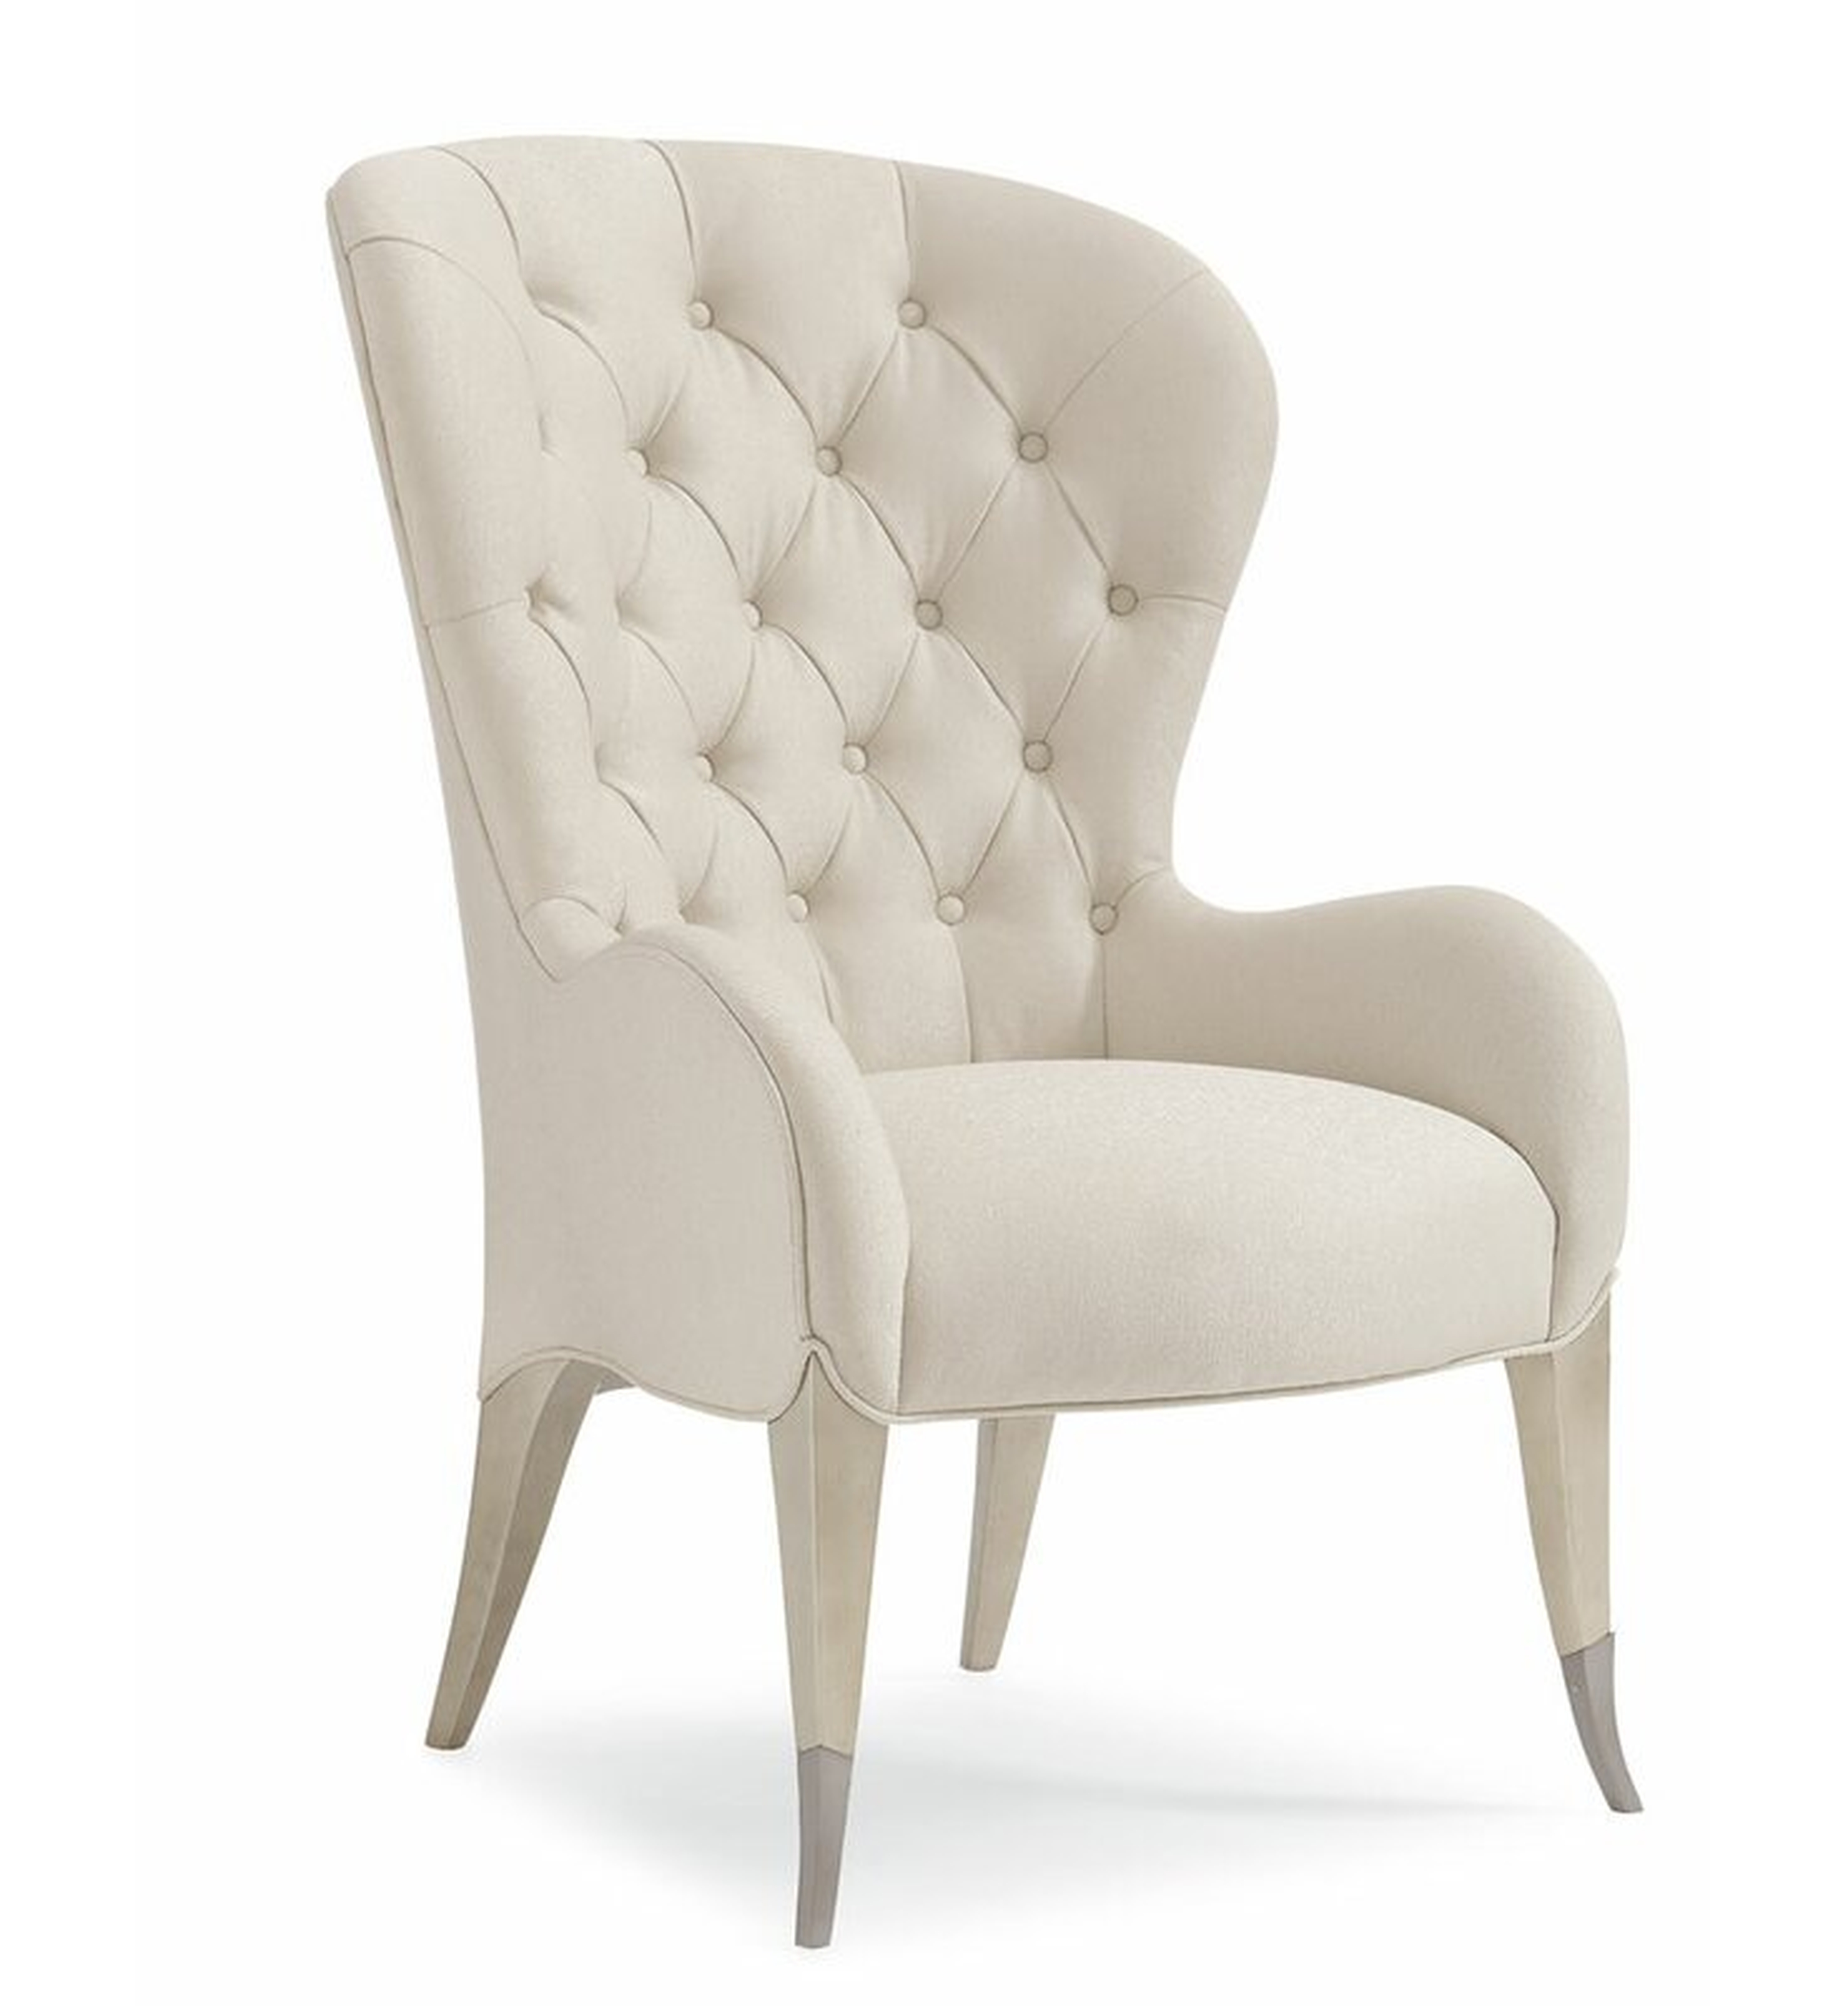 Caracole Classic Inside Story Wingback Chair - Perigold